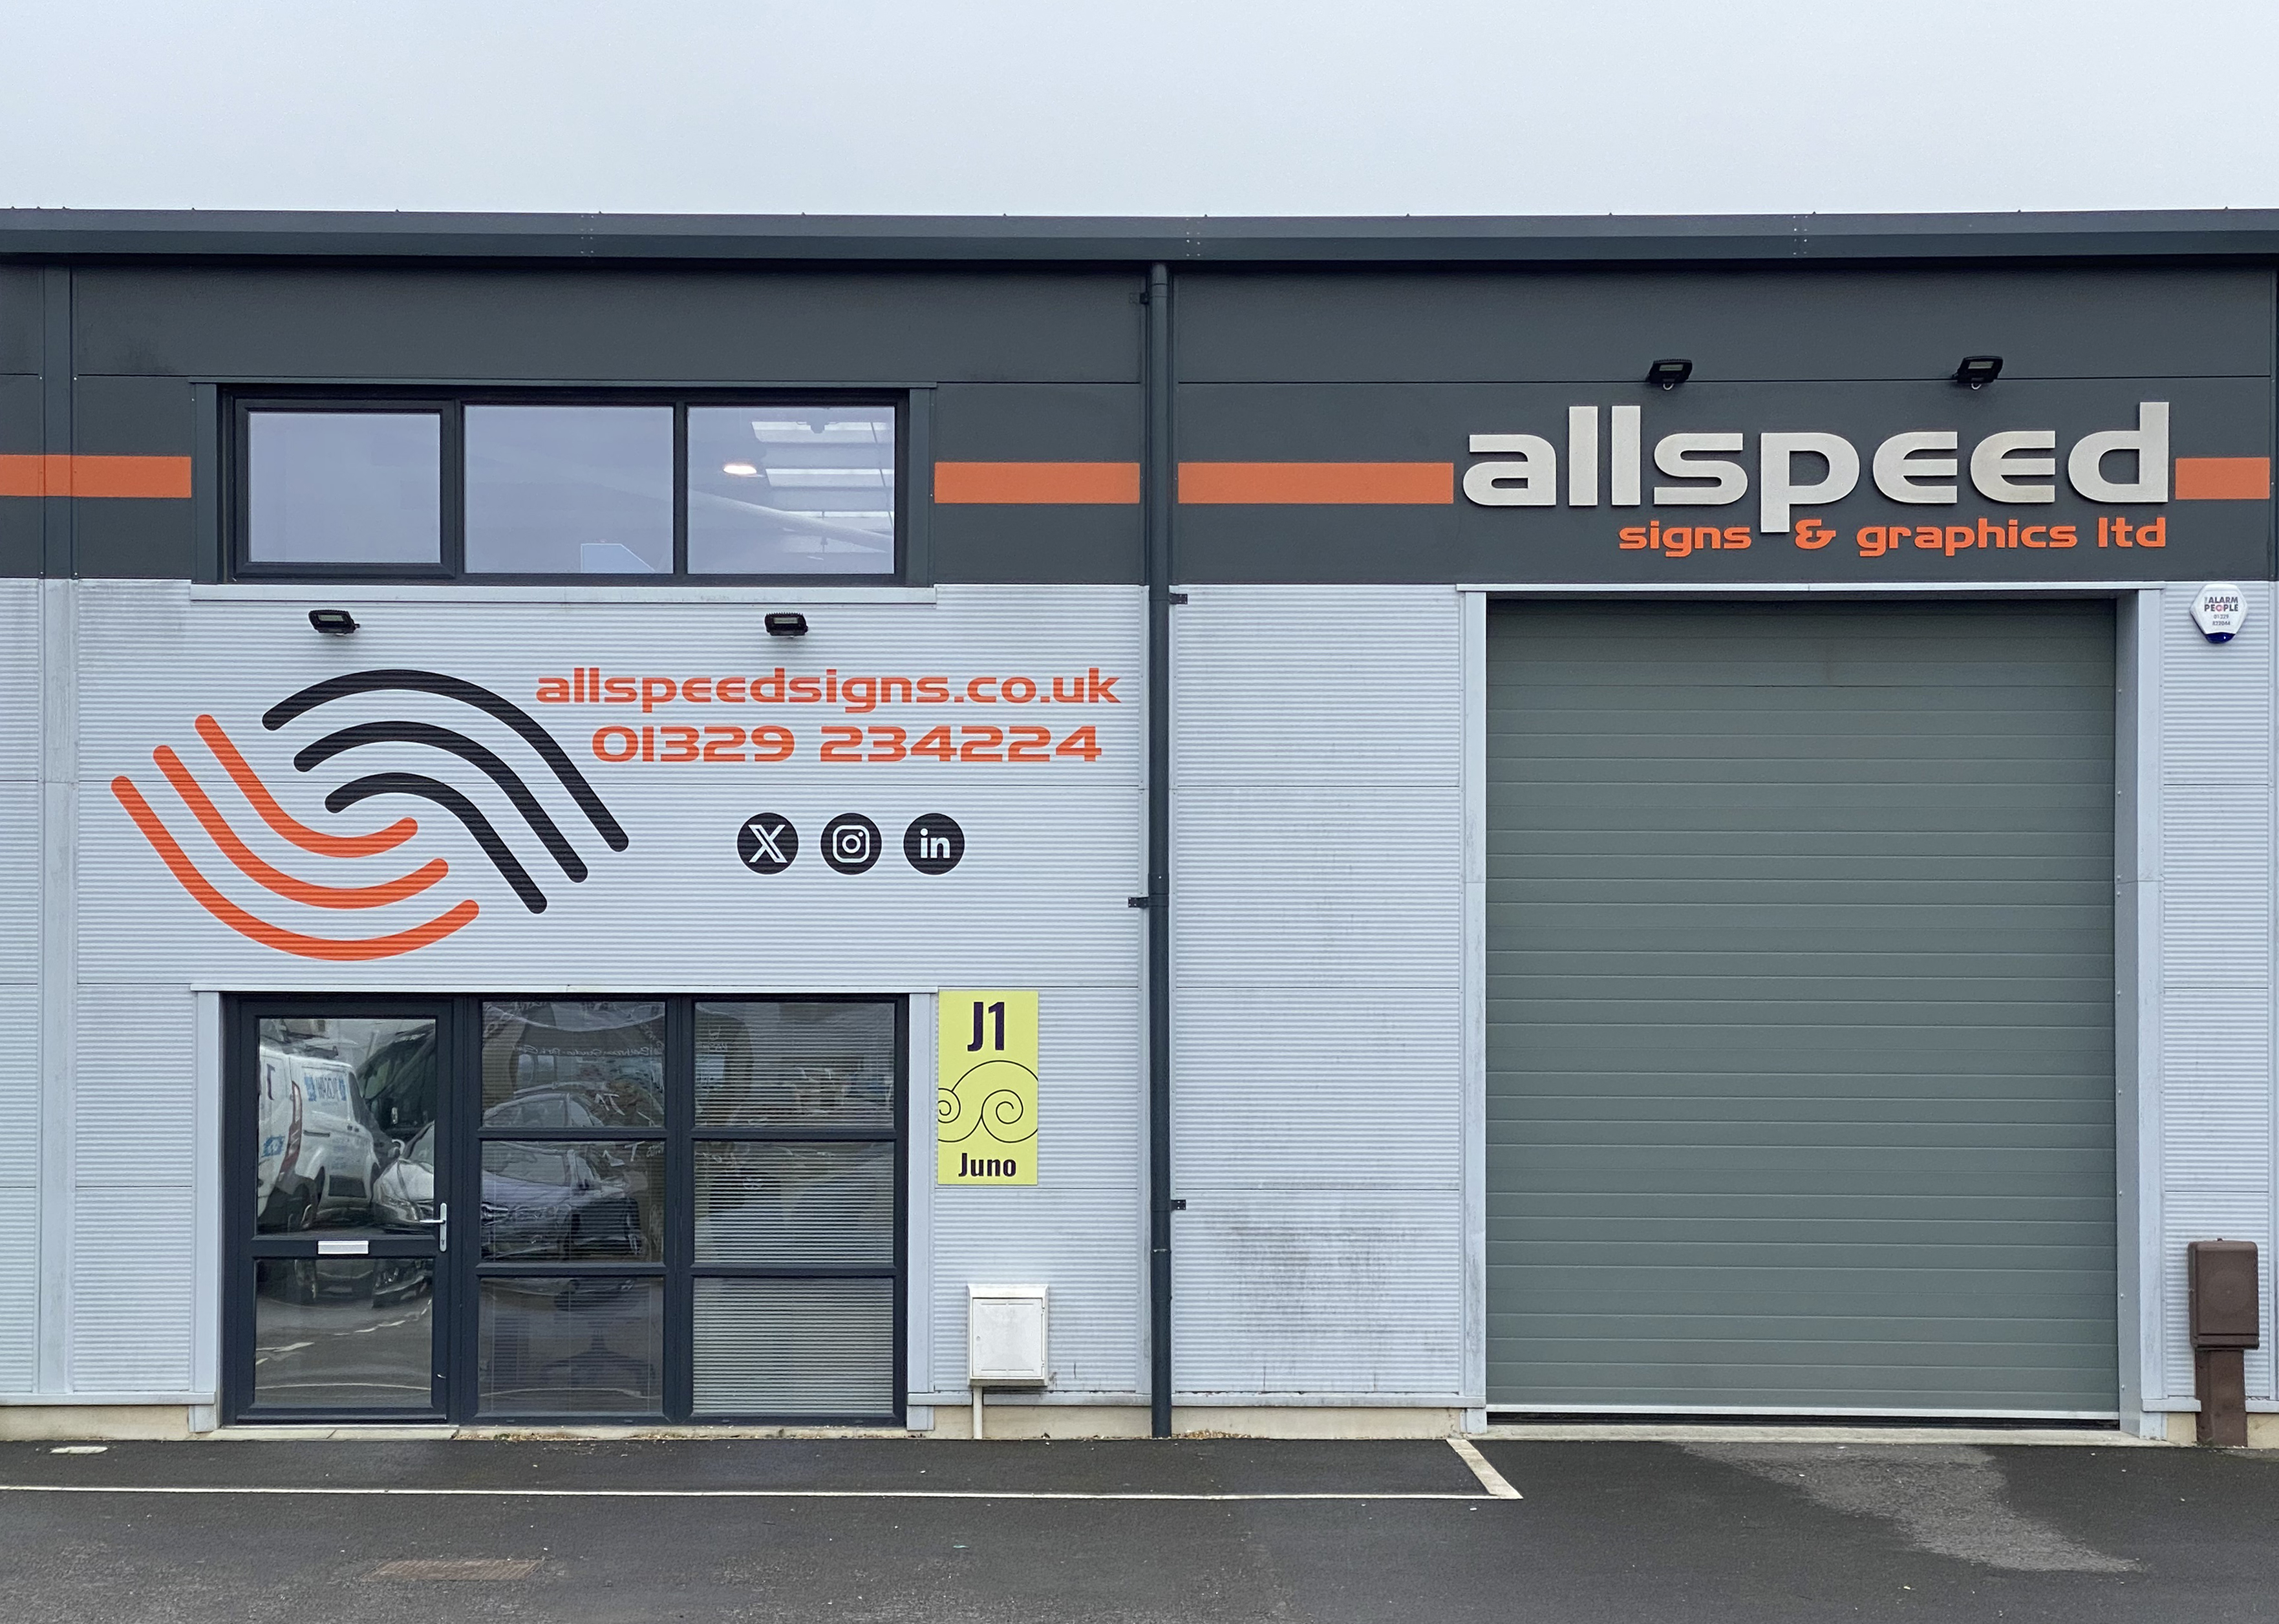 Shop front of Allspeed Signs & Graphics Ltd